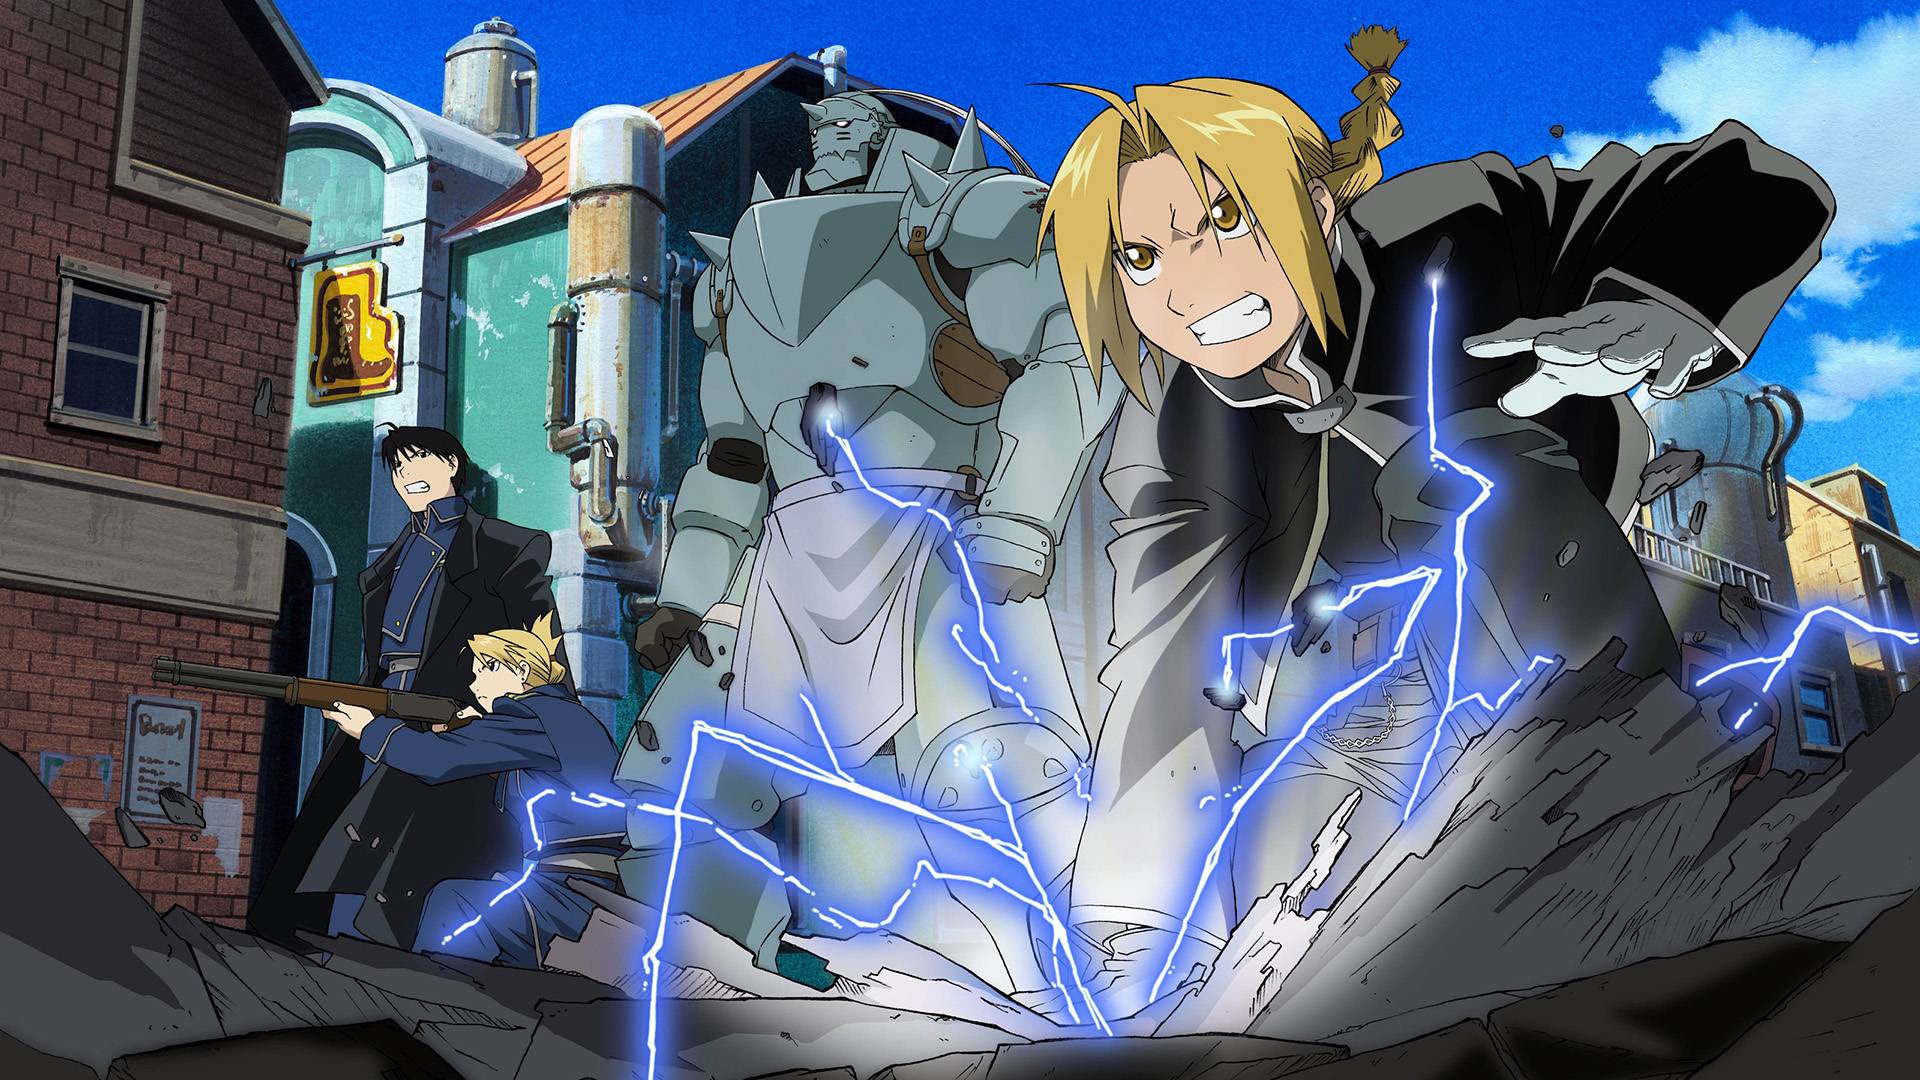 Fullmetal Alchemist has a surprising cross-section of art styles that makes it special to this day